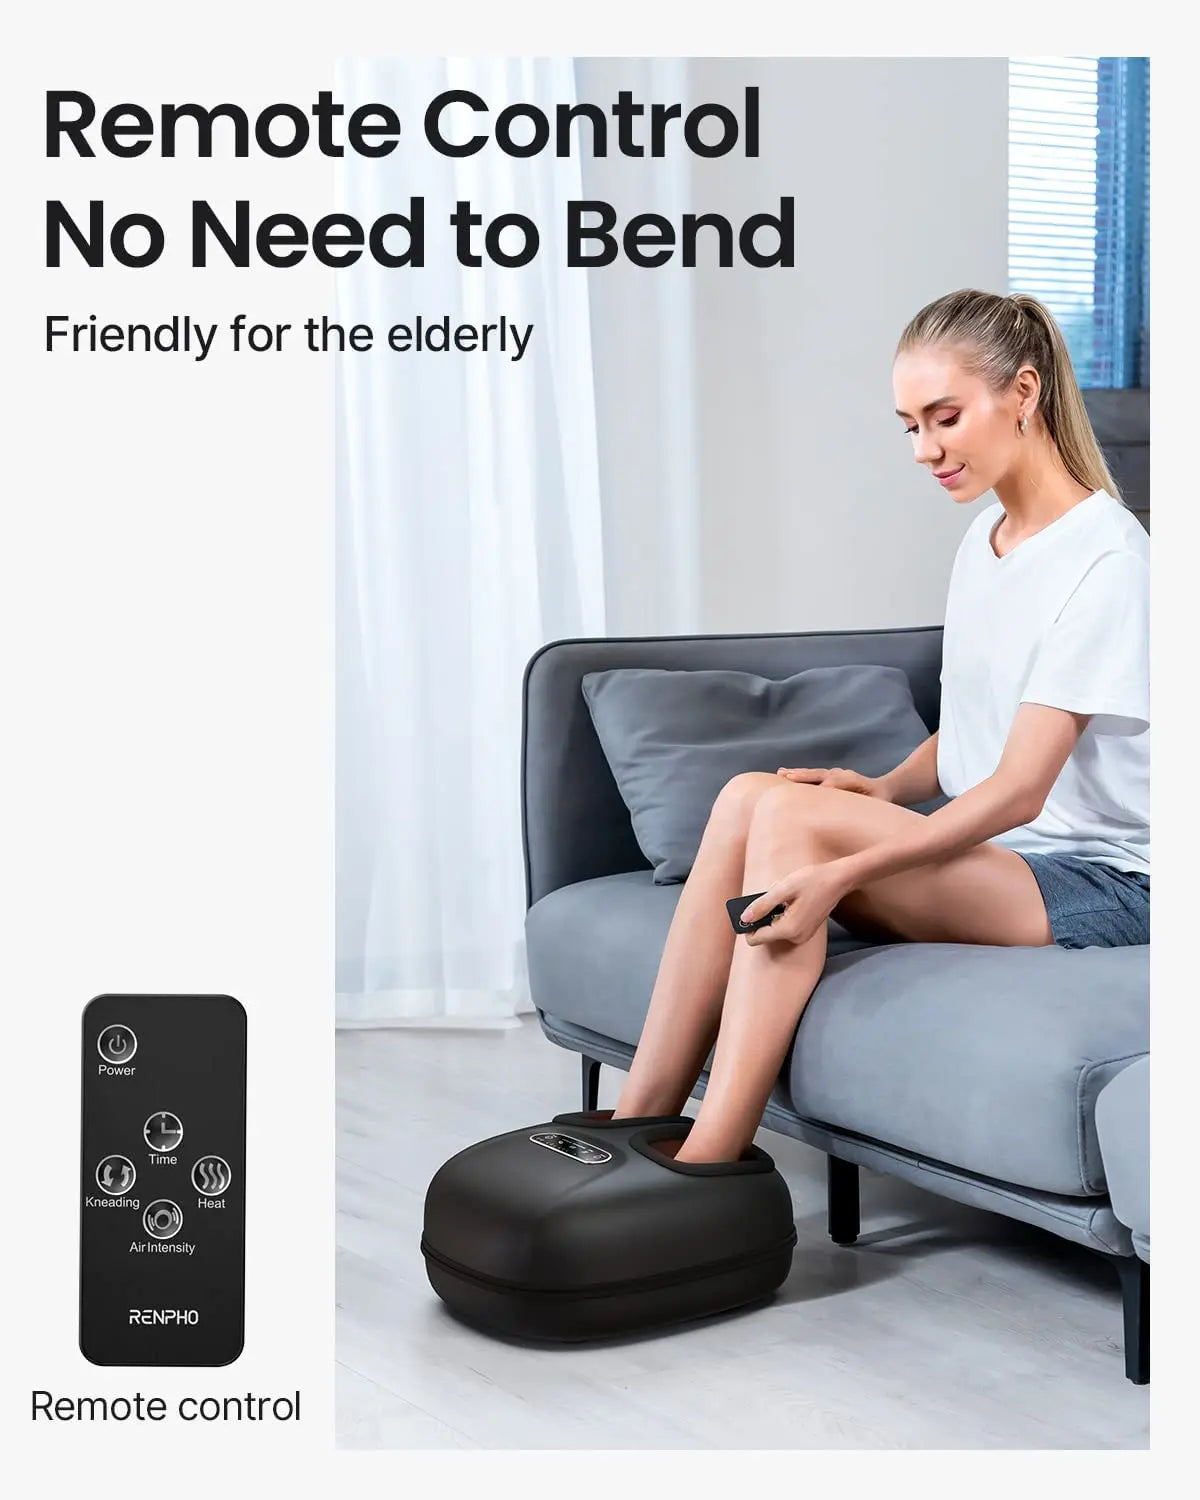 A woman sits on a grey couch using a remote control to operate a black Renpho EU Shiatsu Foot Massager Lite. She is dressed in casual clothes and appears relaxed, enjoying the soothing massage experience for sore and tired feet. The text on the image reads, "Remote Control. No Need to Bend. Friendly for the elderly." An inset shows the remote with its buttons.